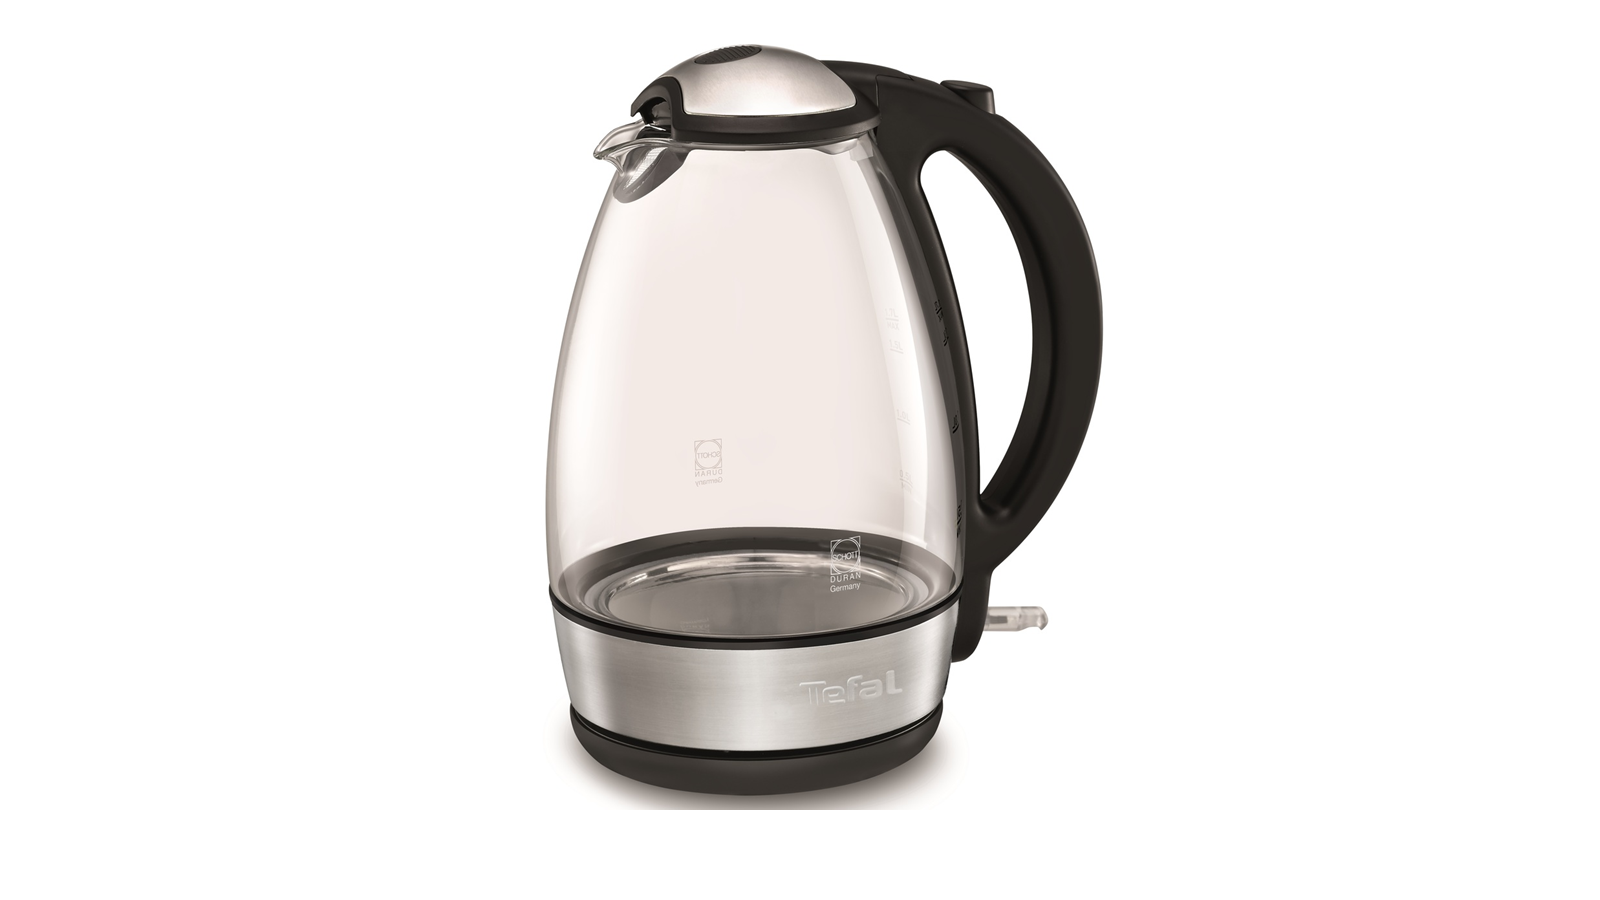 tefal glass kettle review